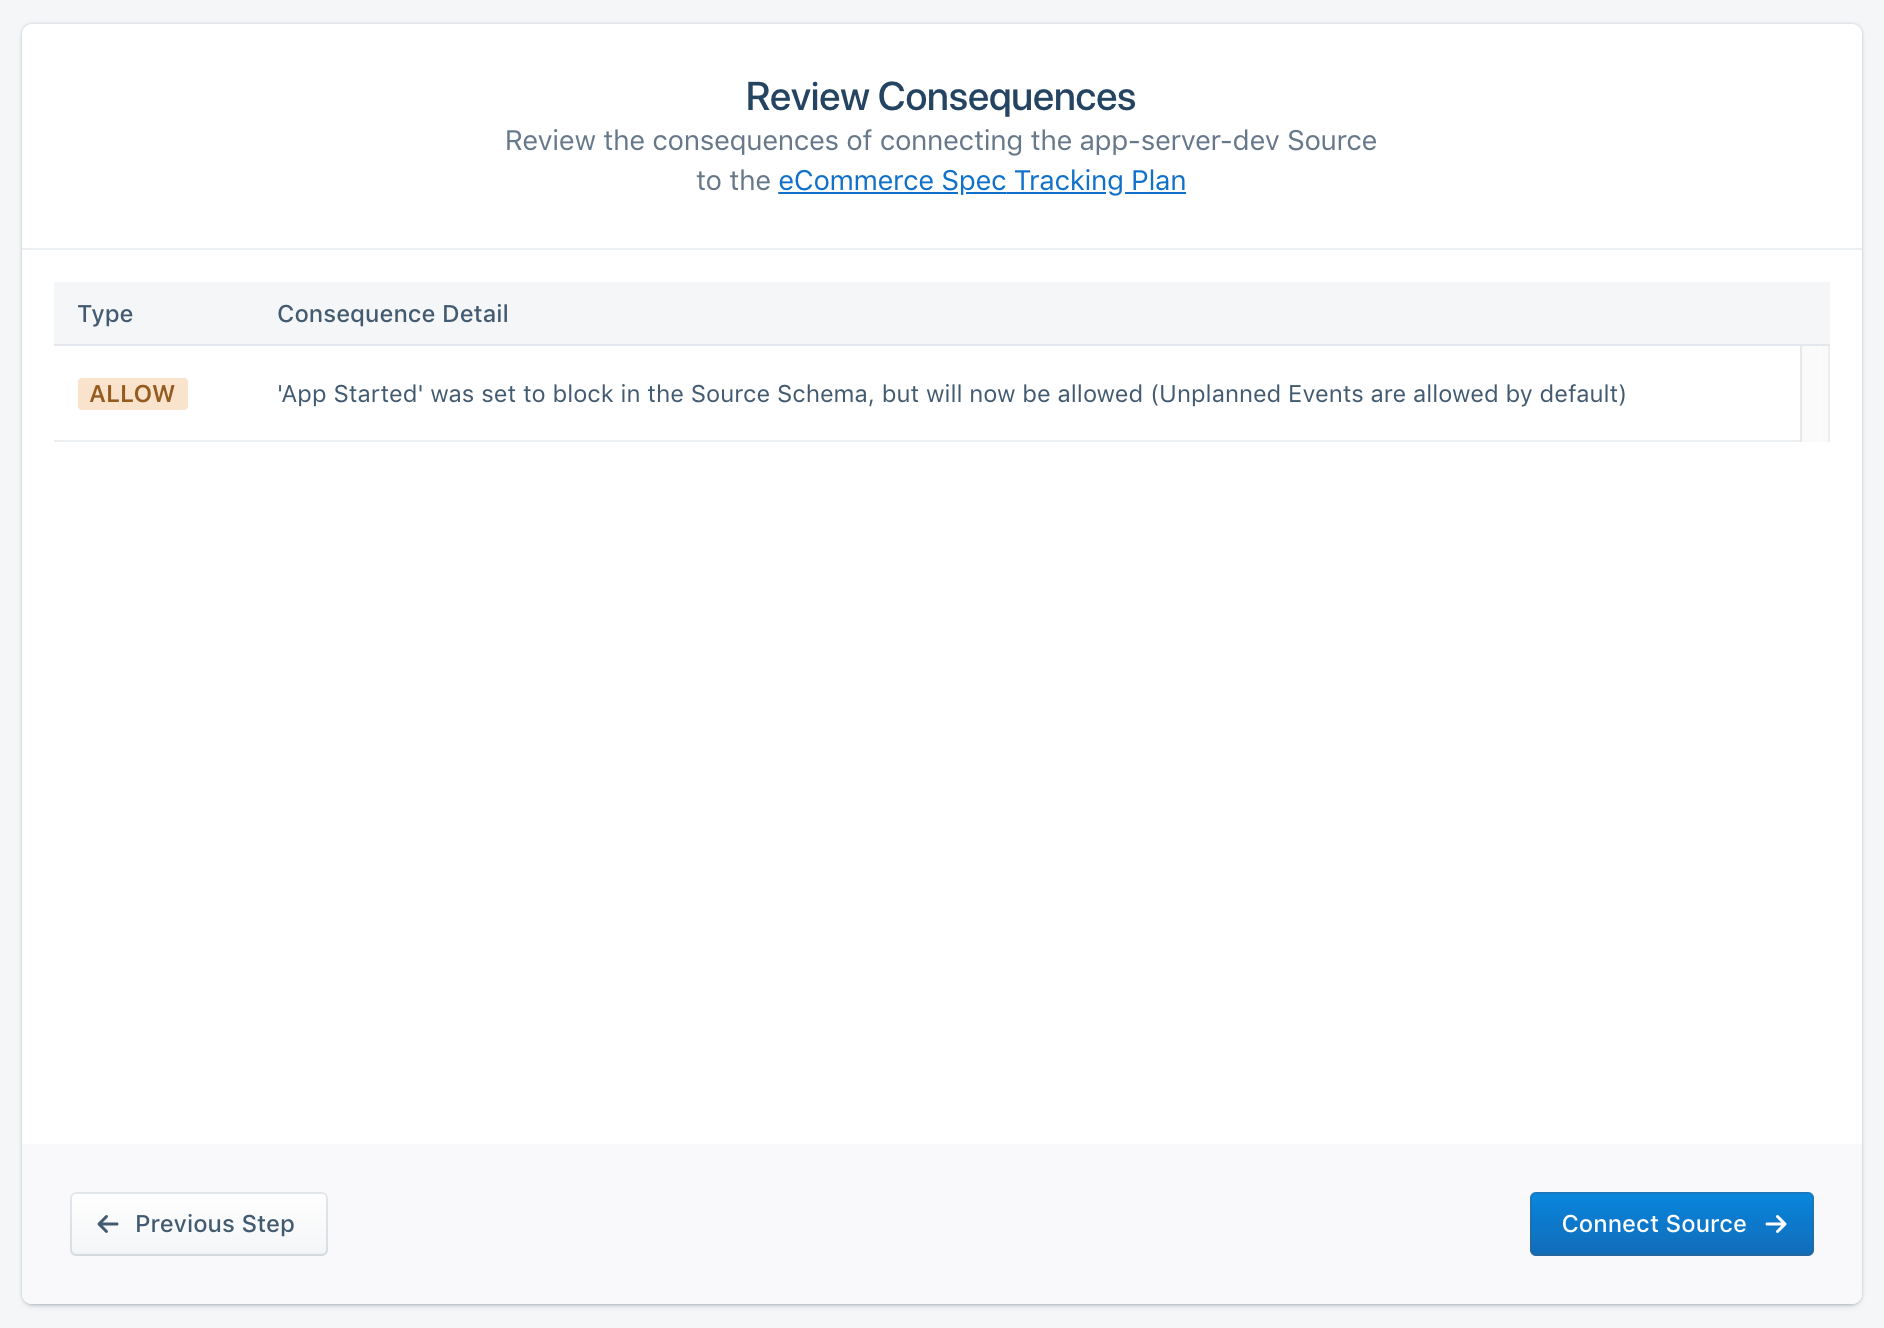 Screenshot of the Review Consequences page, with one type and consequence detail present on the page.